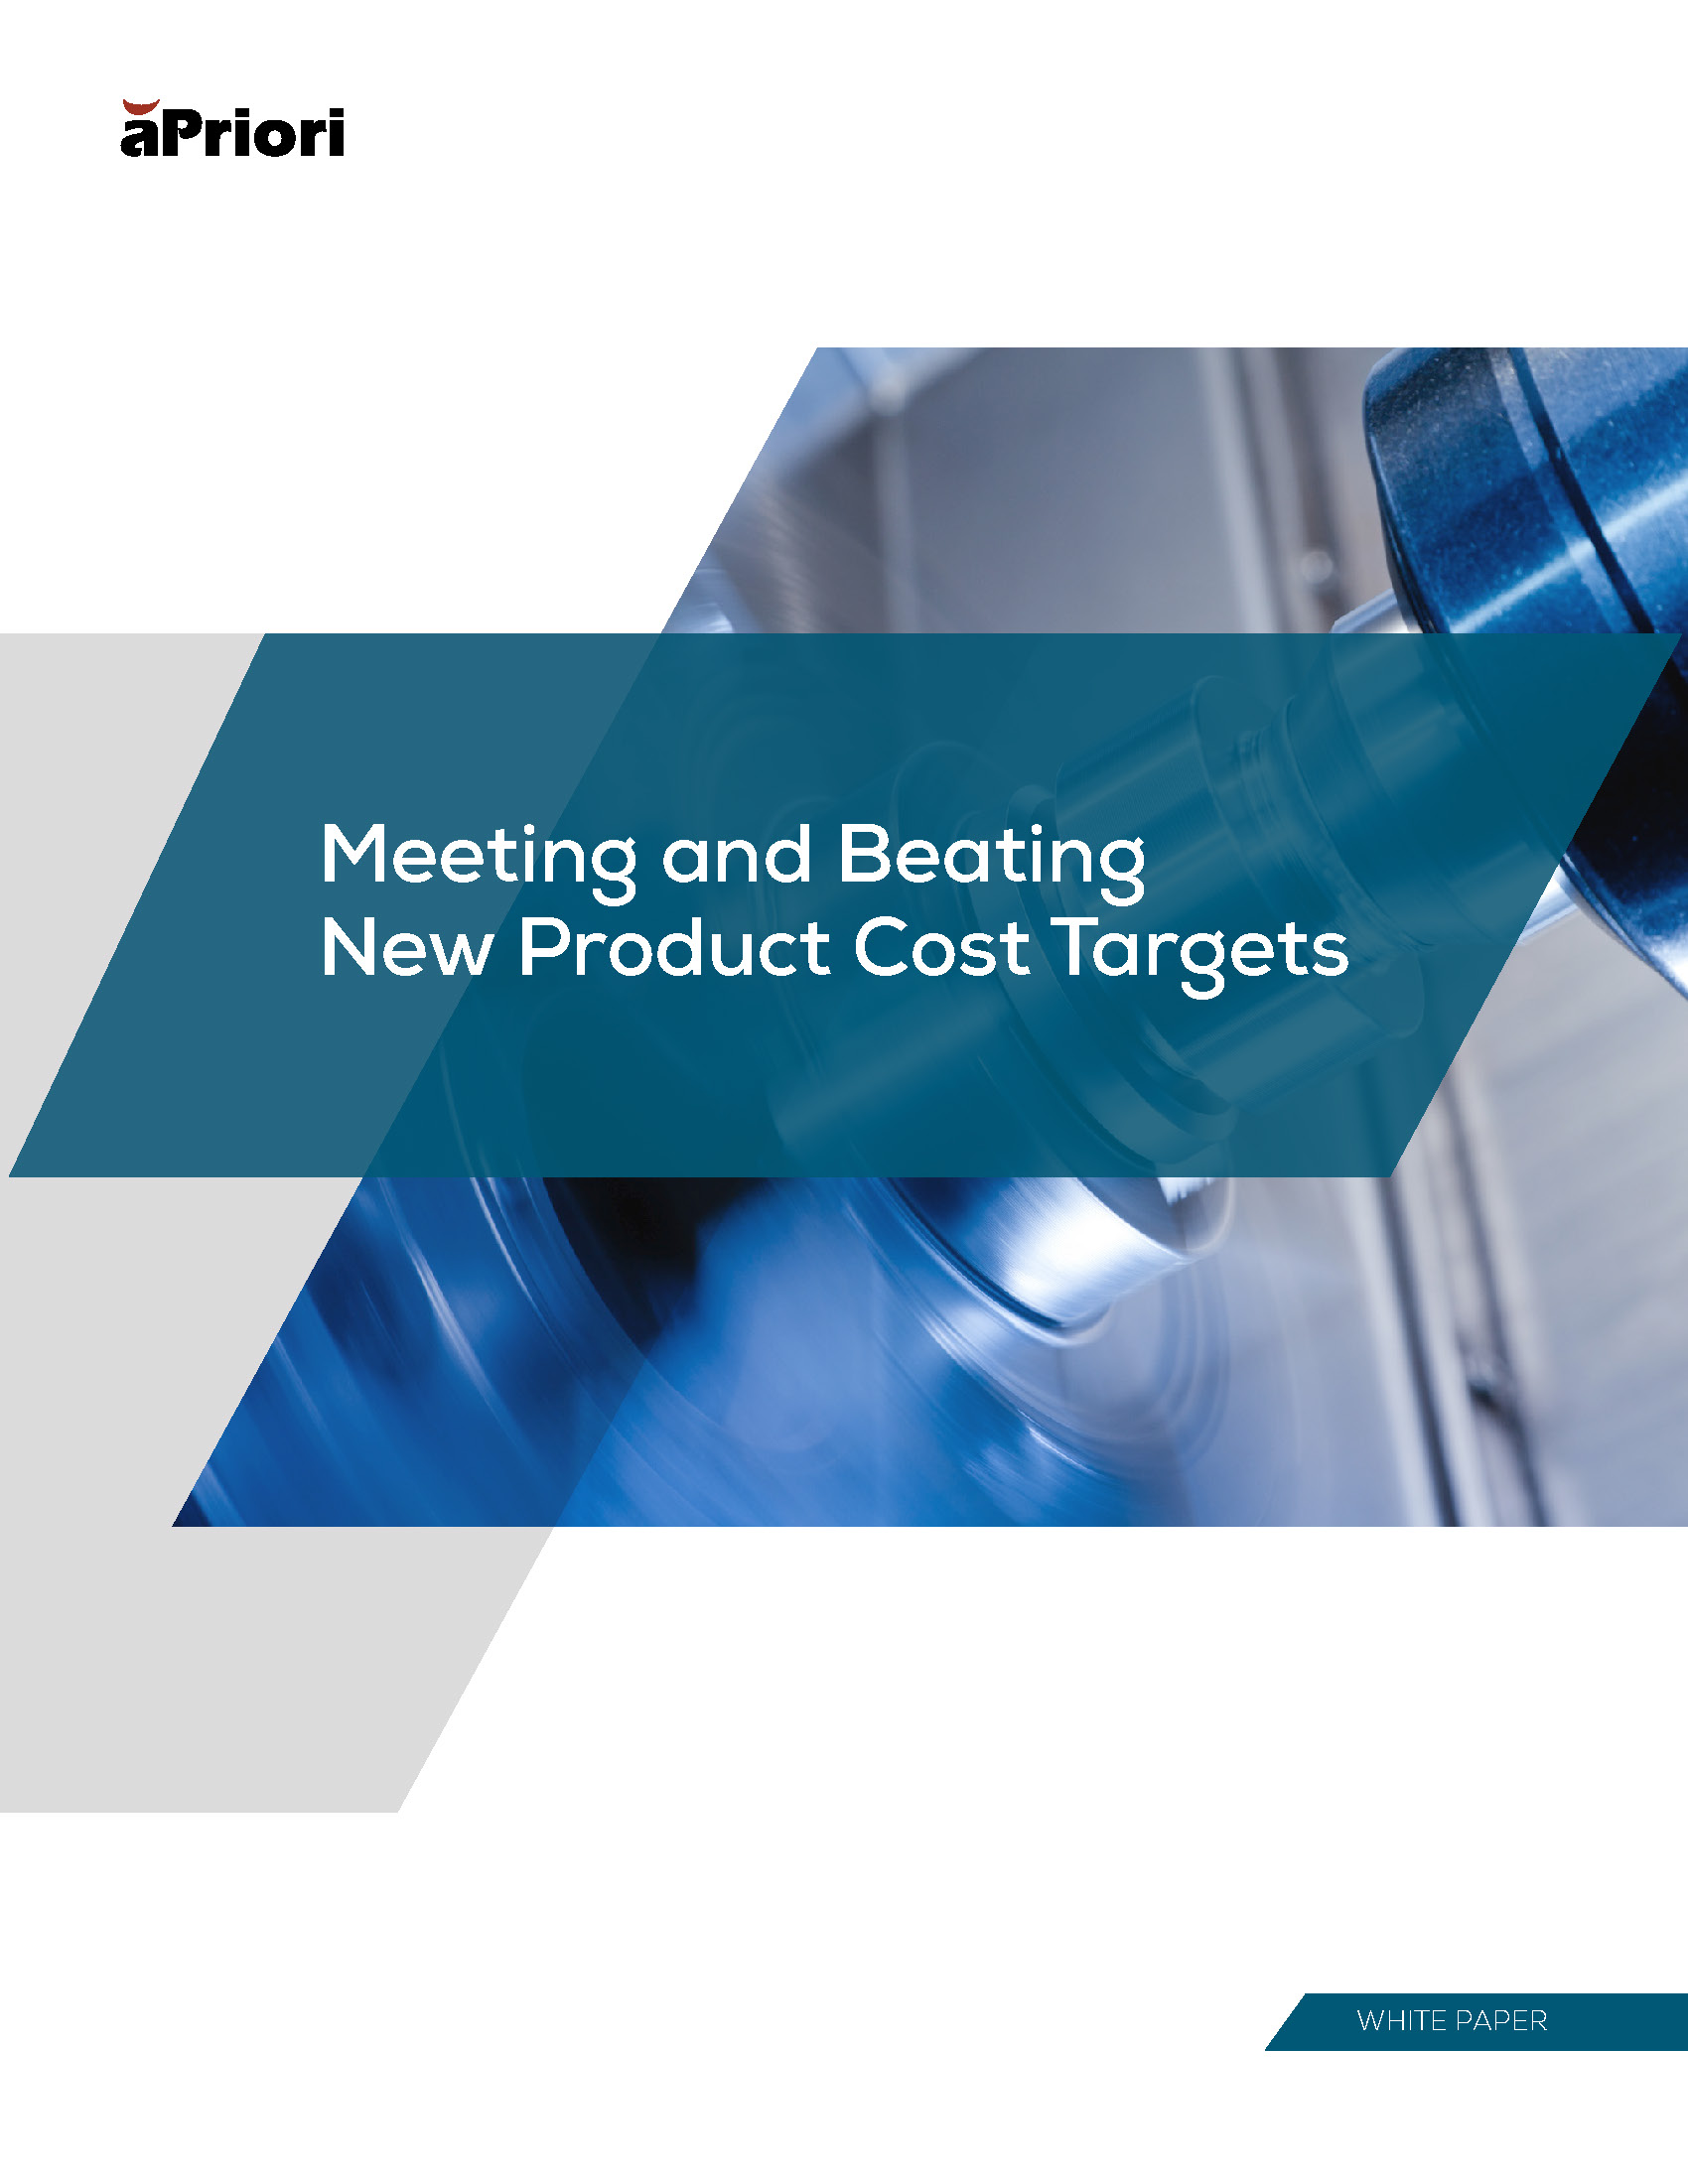 Meeting & Beating New Product Cost Targets